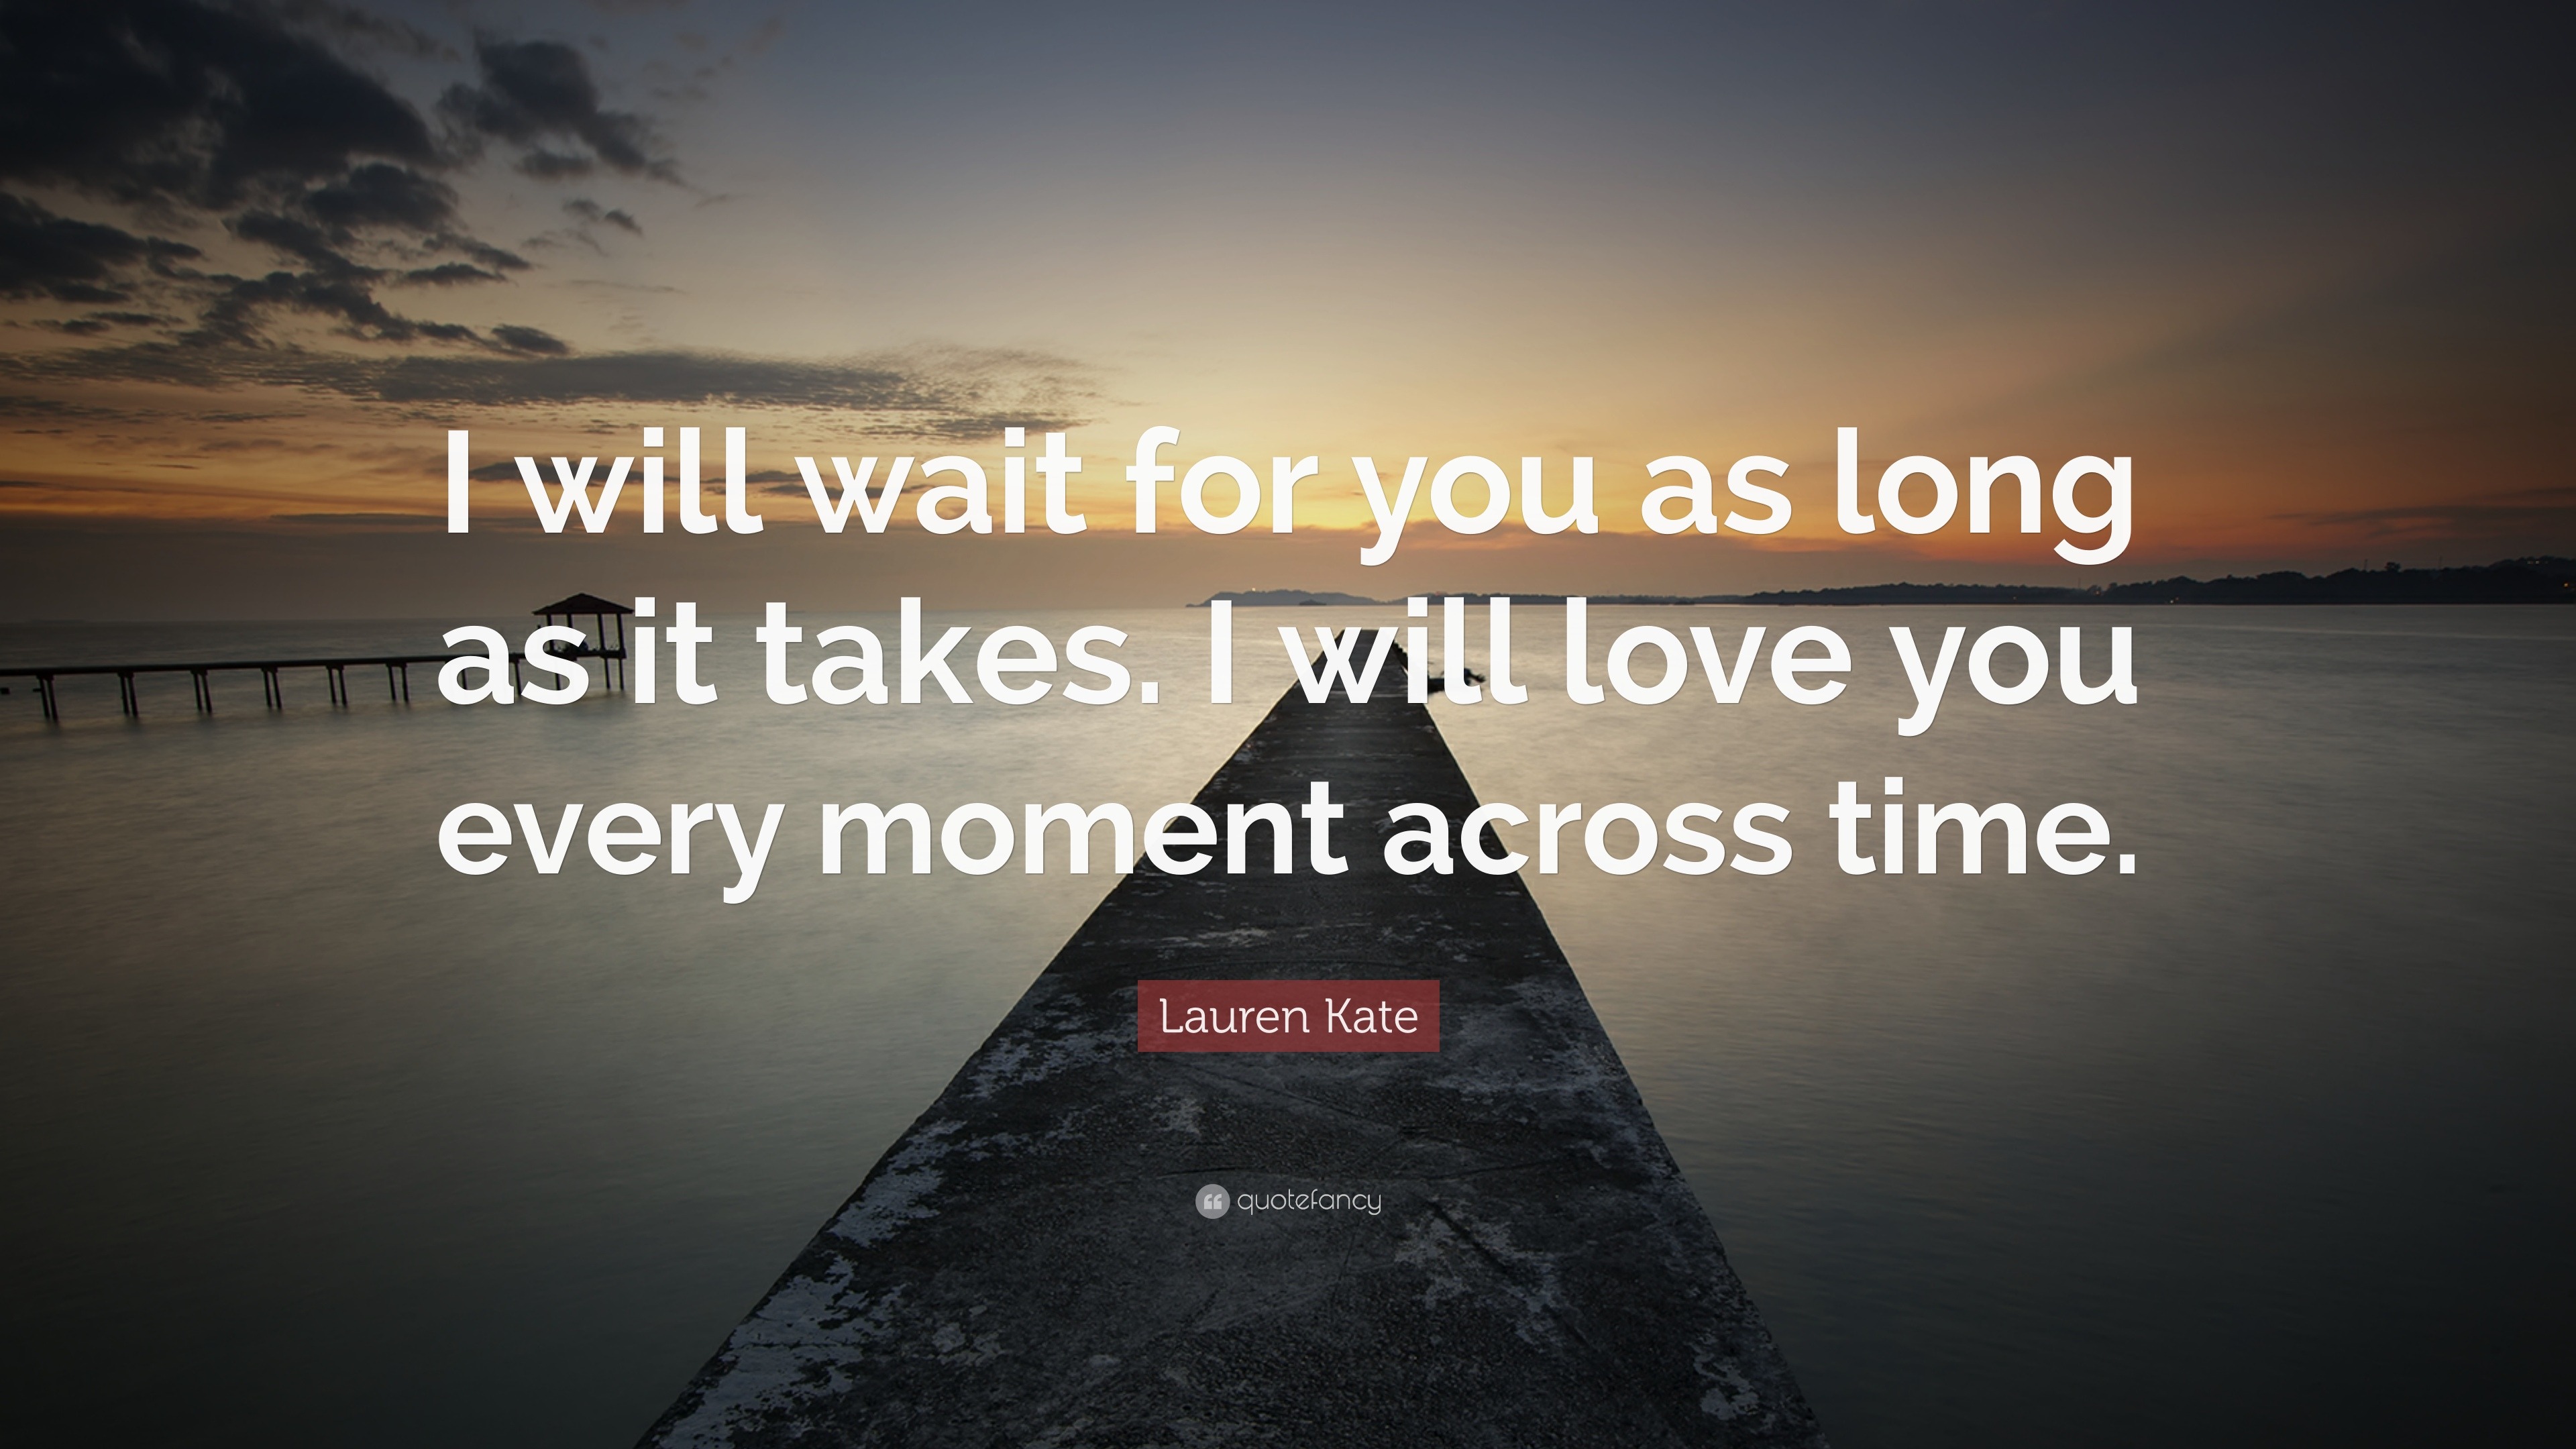 Lauren Kate Quote “I will wait for you as long as it takes